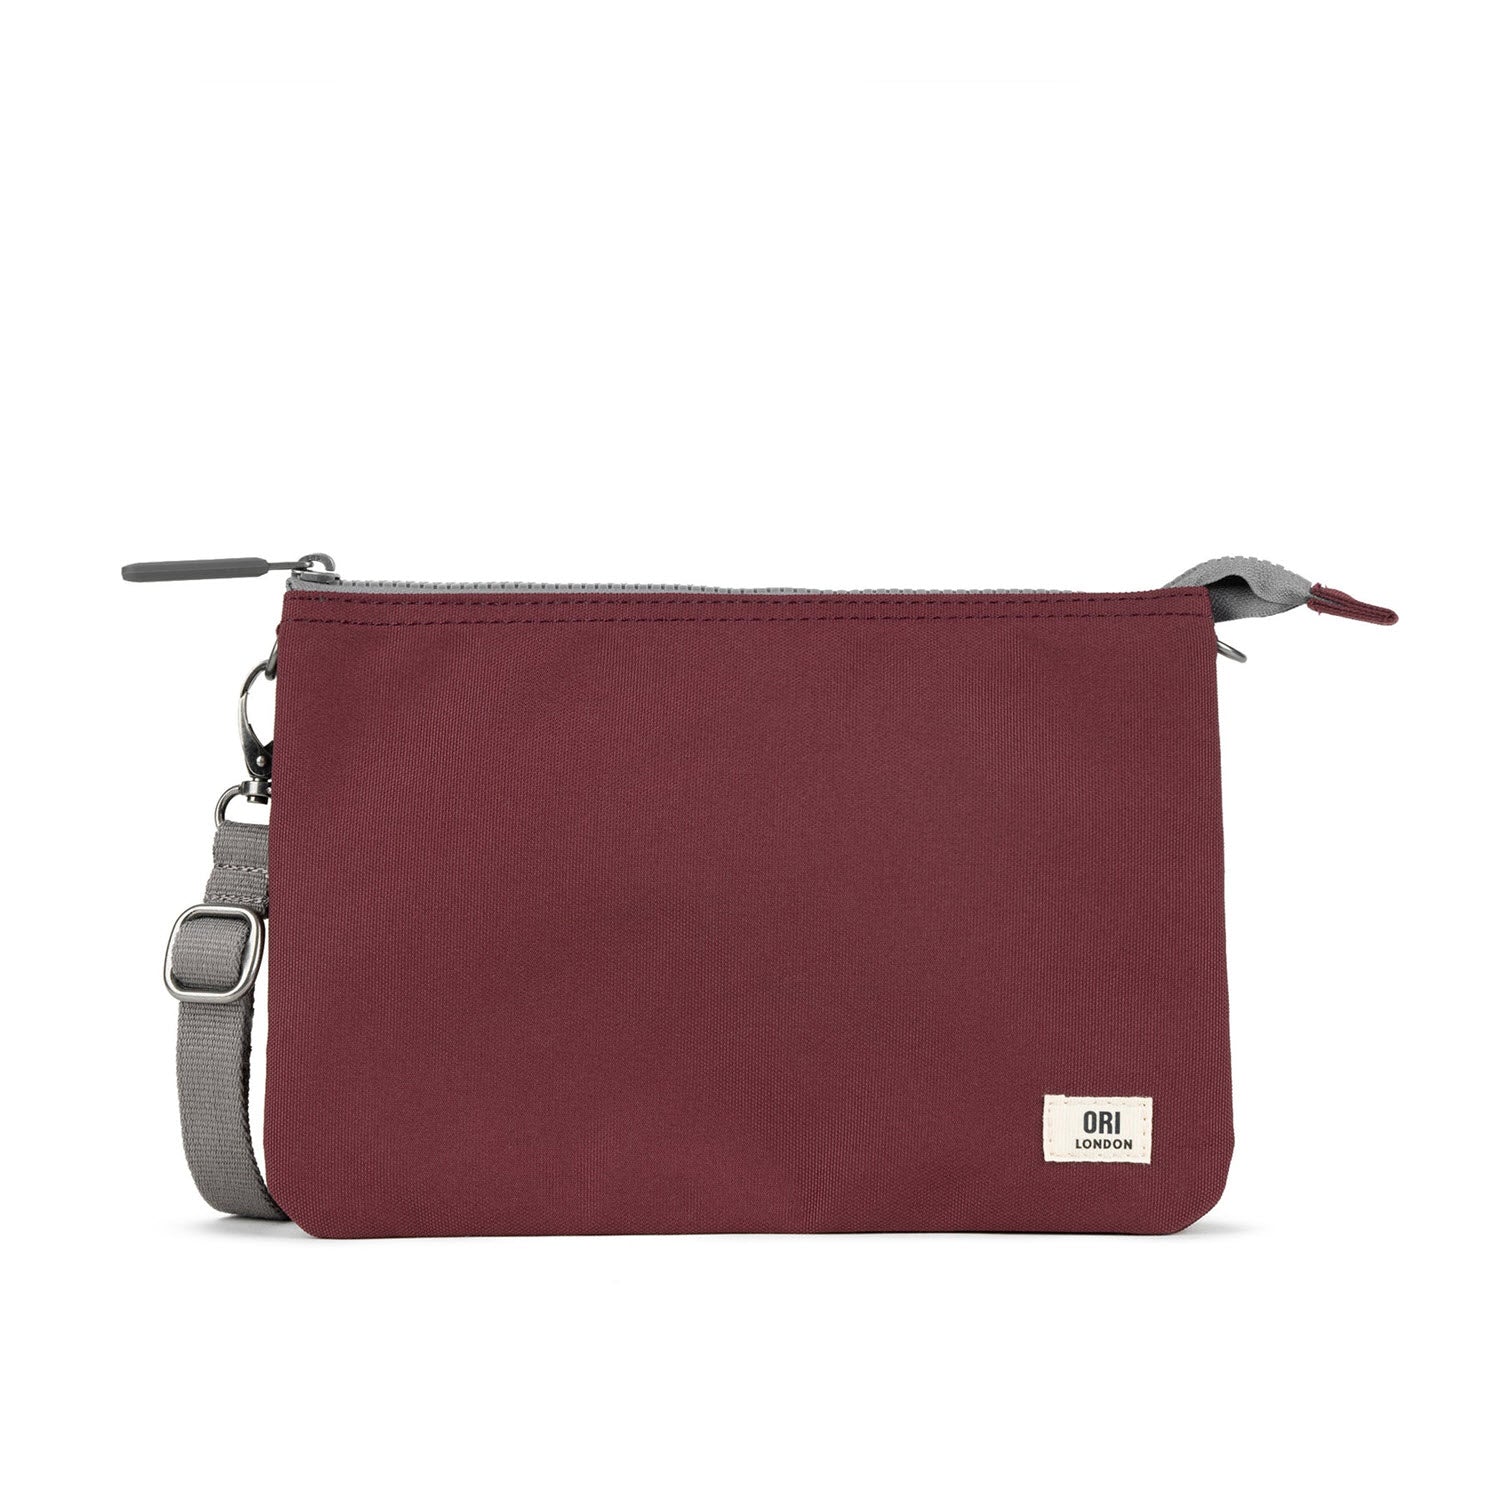 A ORI LONDON CARNABY XL CROSSBODY ZINFANDEL with a zipper, featuring a white logo on the bottom right corner, against a white background.